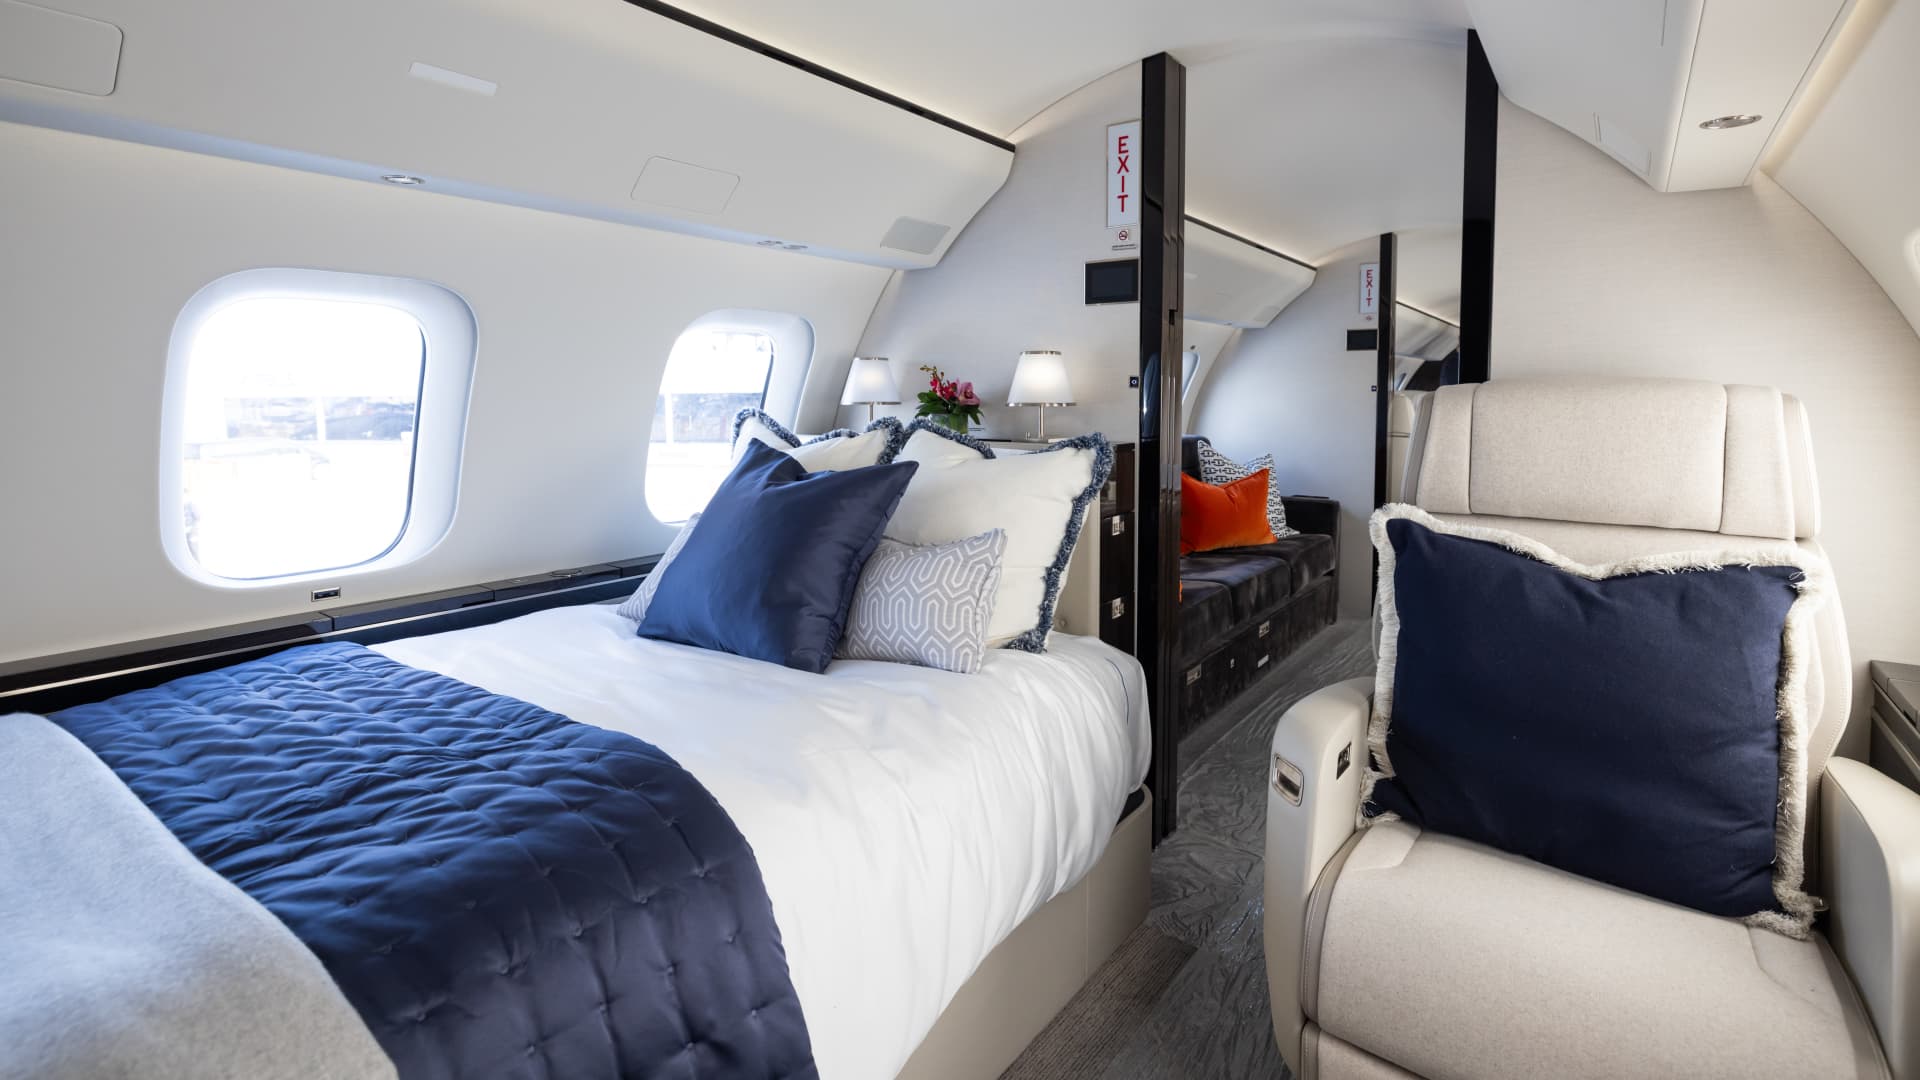 How Bombardier is cashing in on business elite's love affair with private jet travel